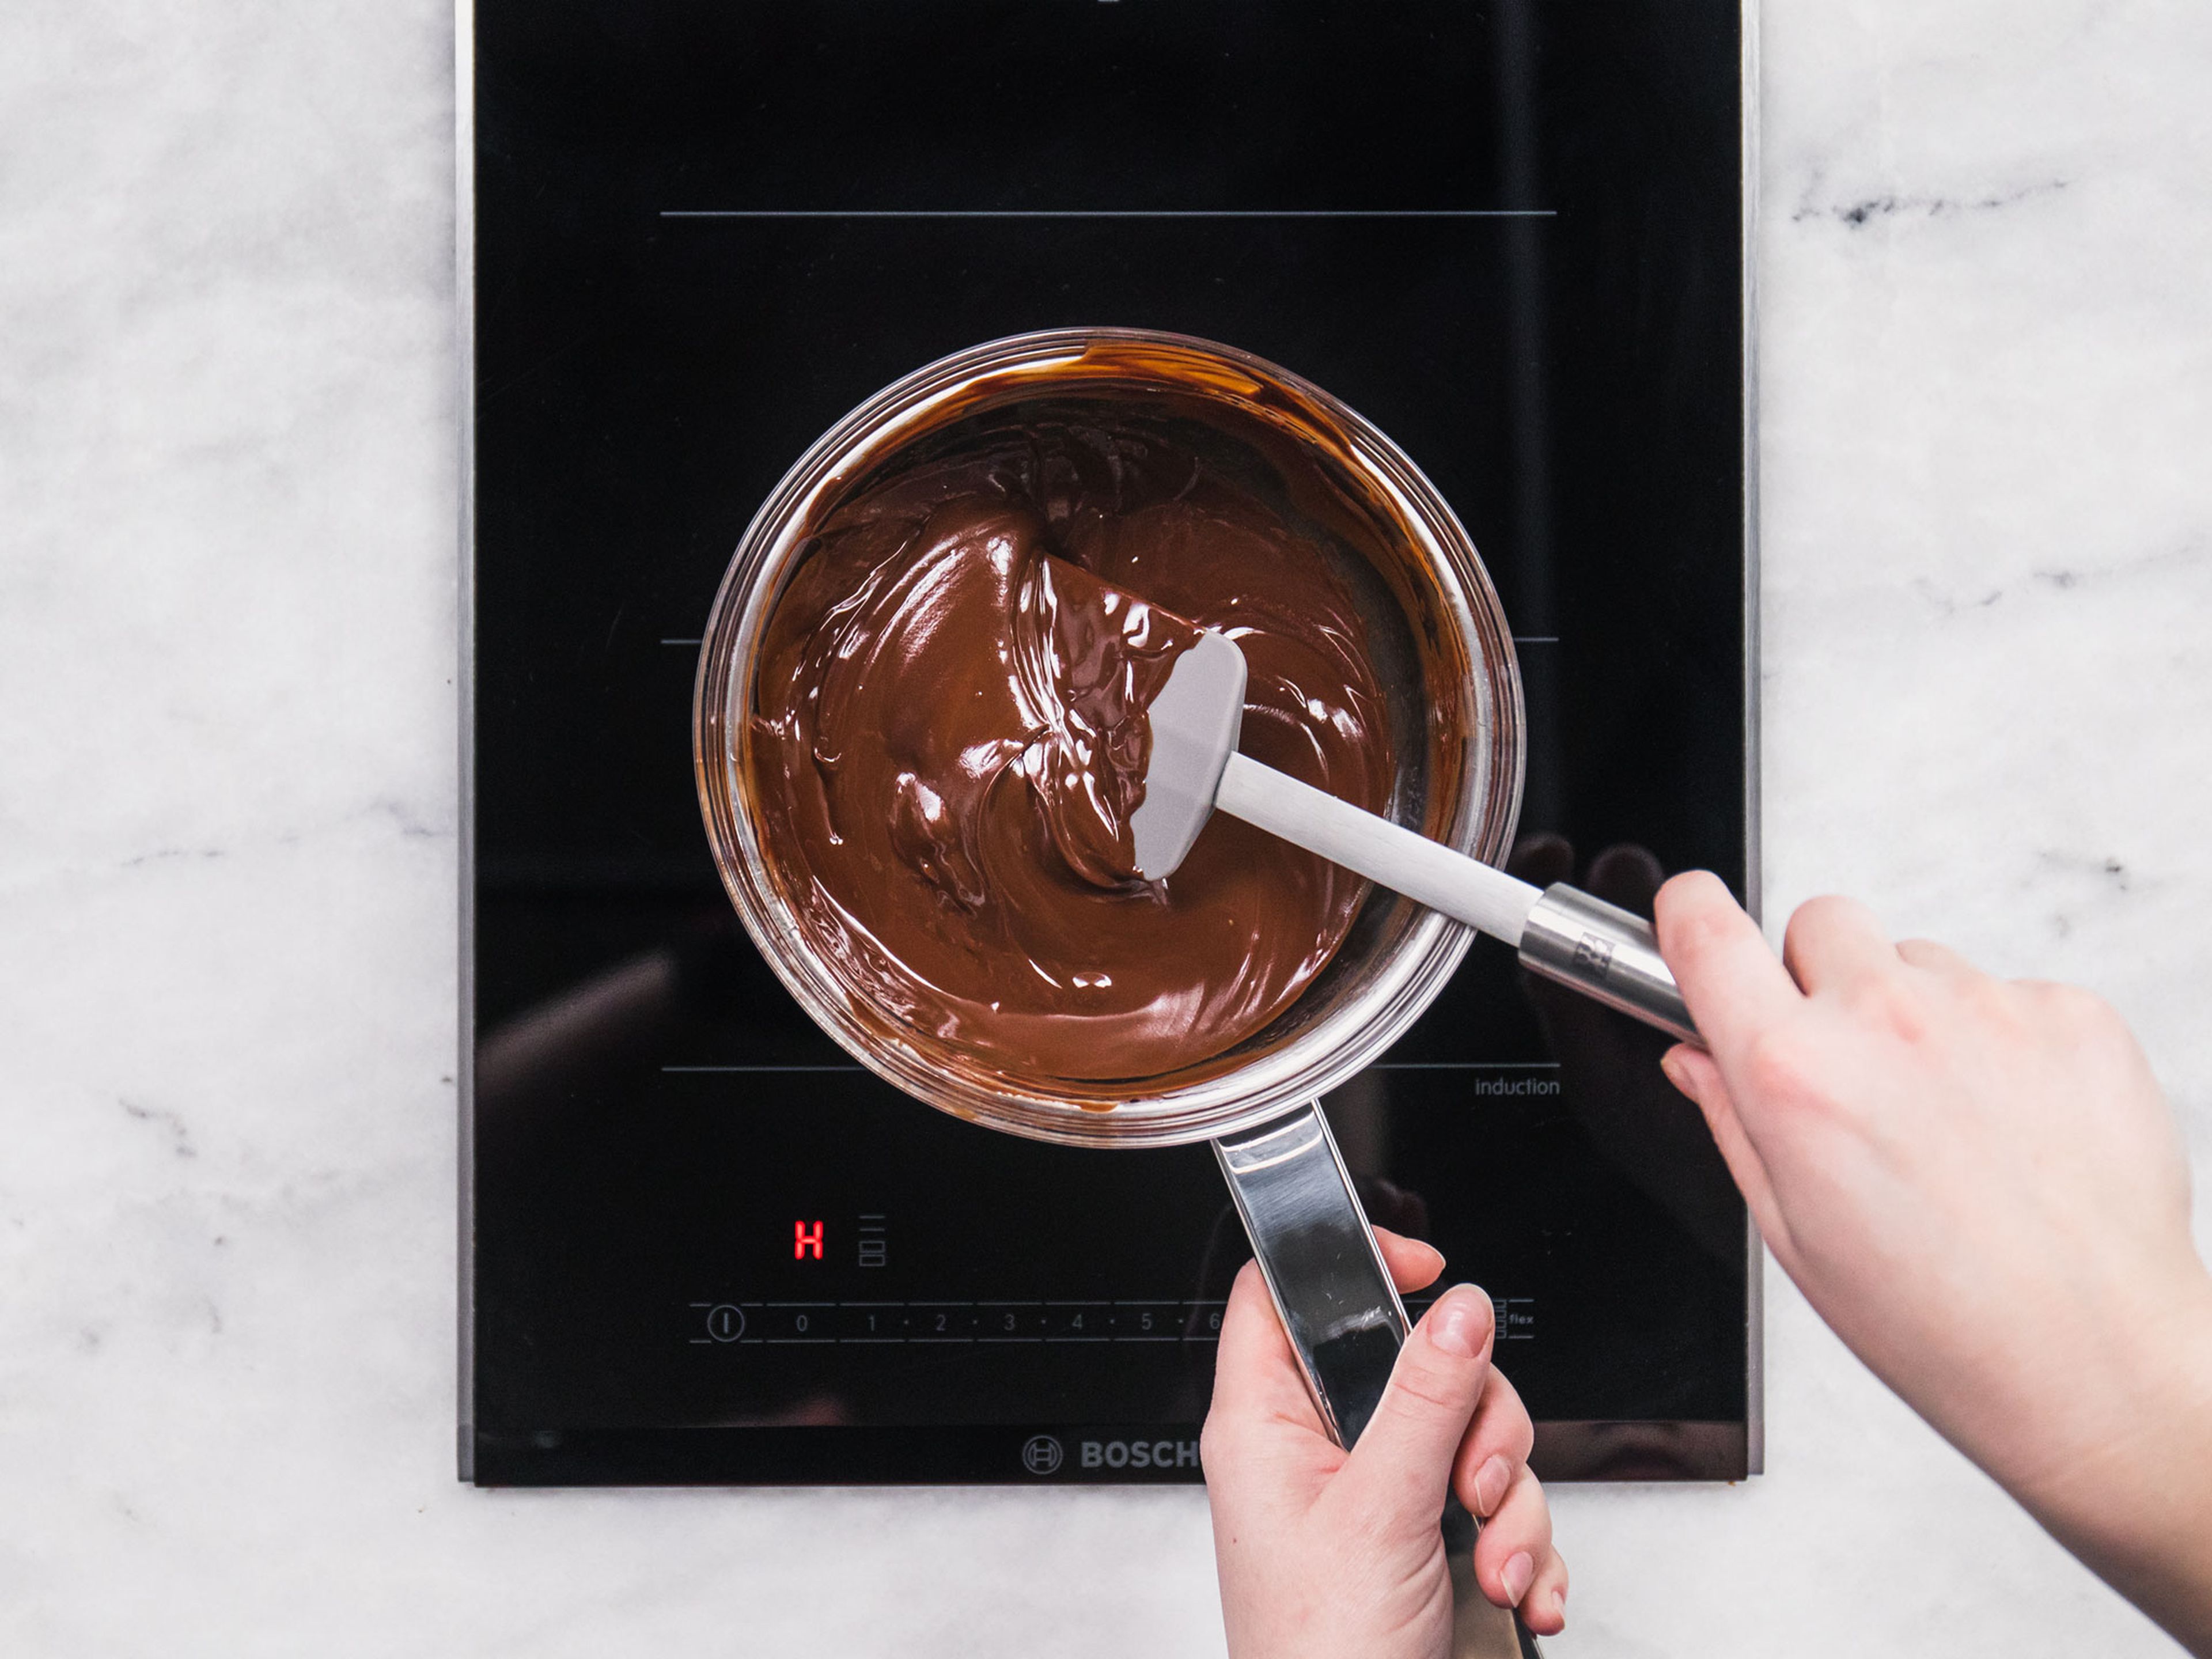 Add some water to a saucepan and bring to a simmer. Place a heatproof bowl on top of the saucepan, making sure it doesn’t touch the simmering water underneath. Add chocolate and butter to the bowl, allow to melt, stirring occasionally, then remove from the heat and set aside.